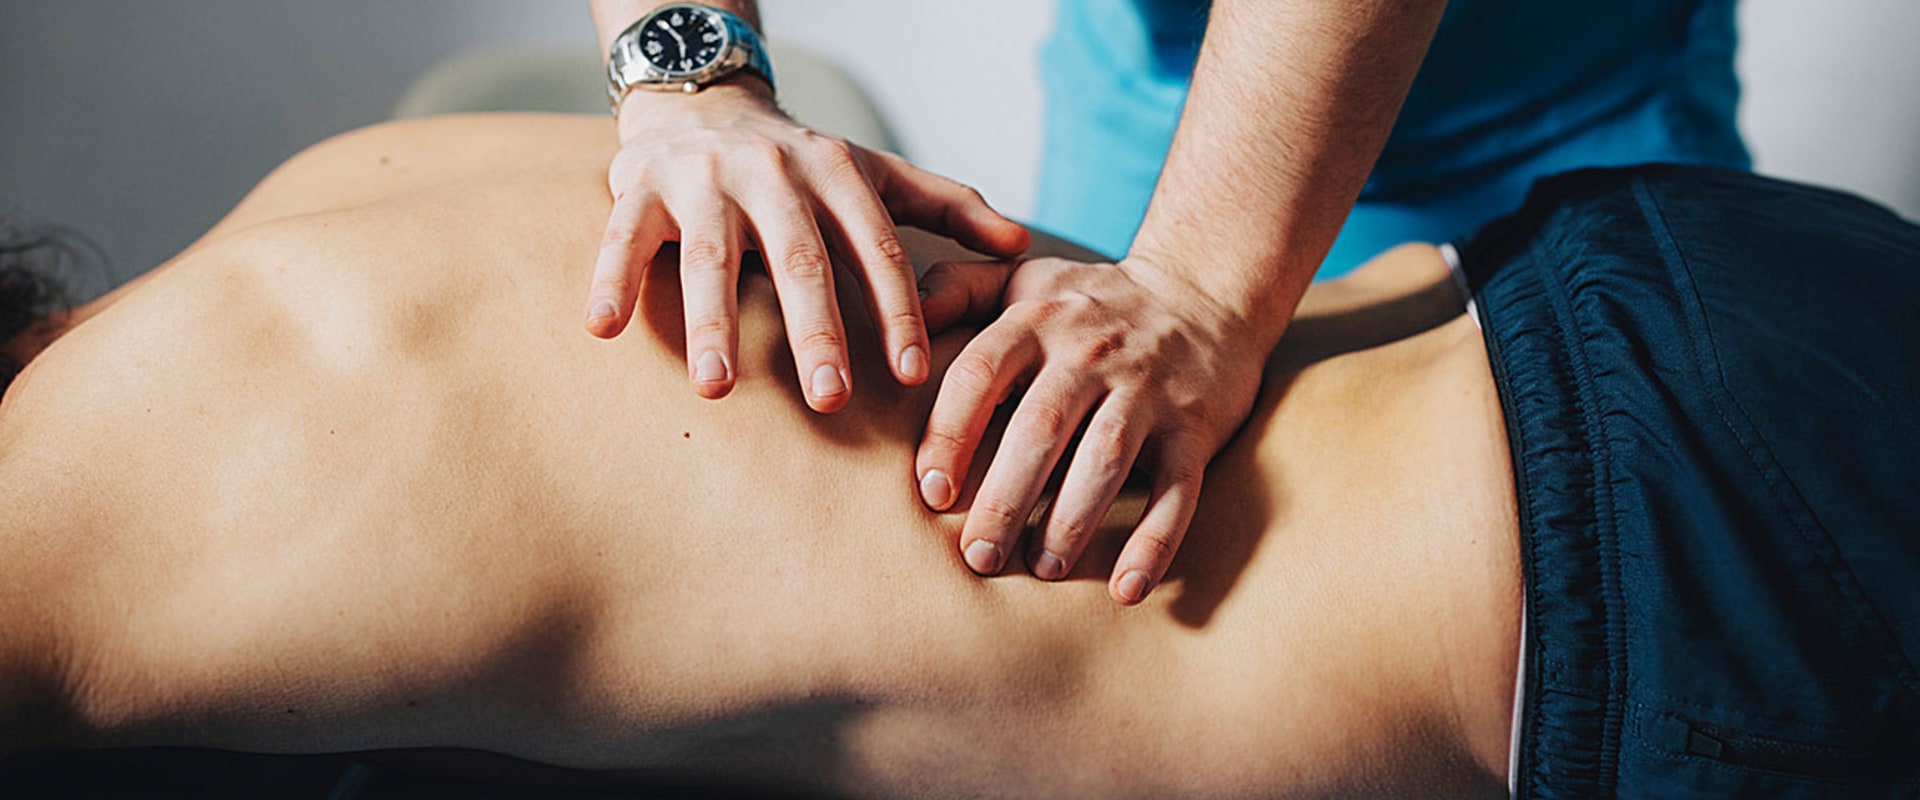 How long does a massage qualification last?